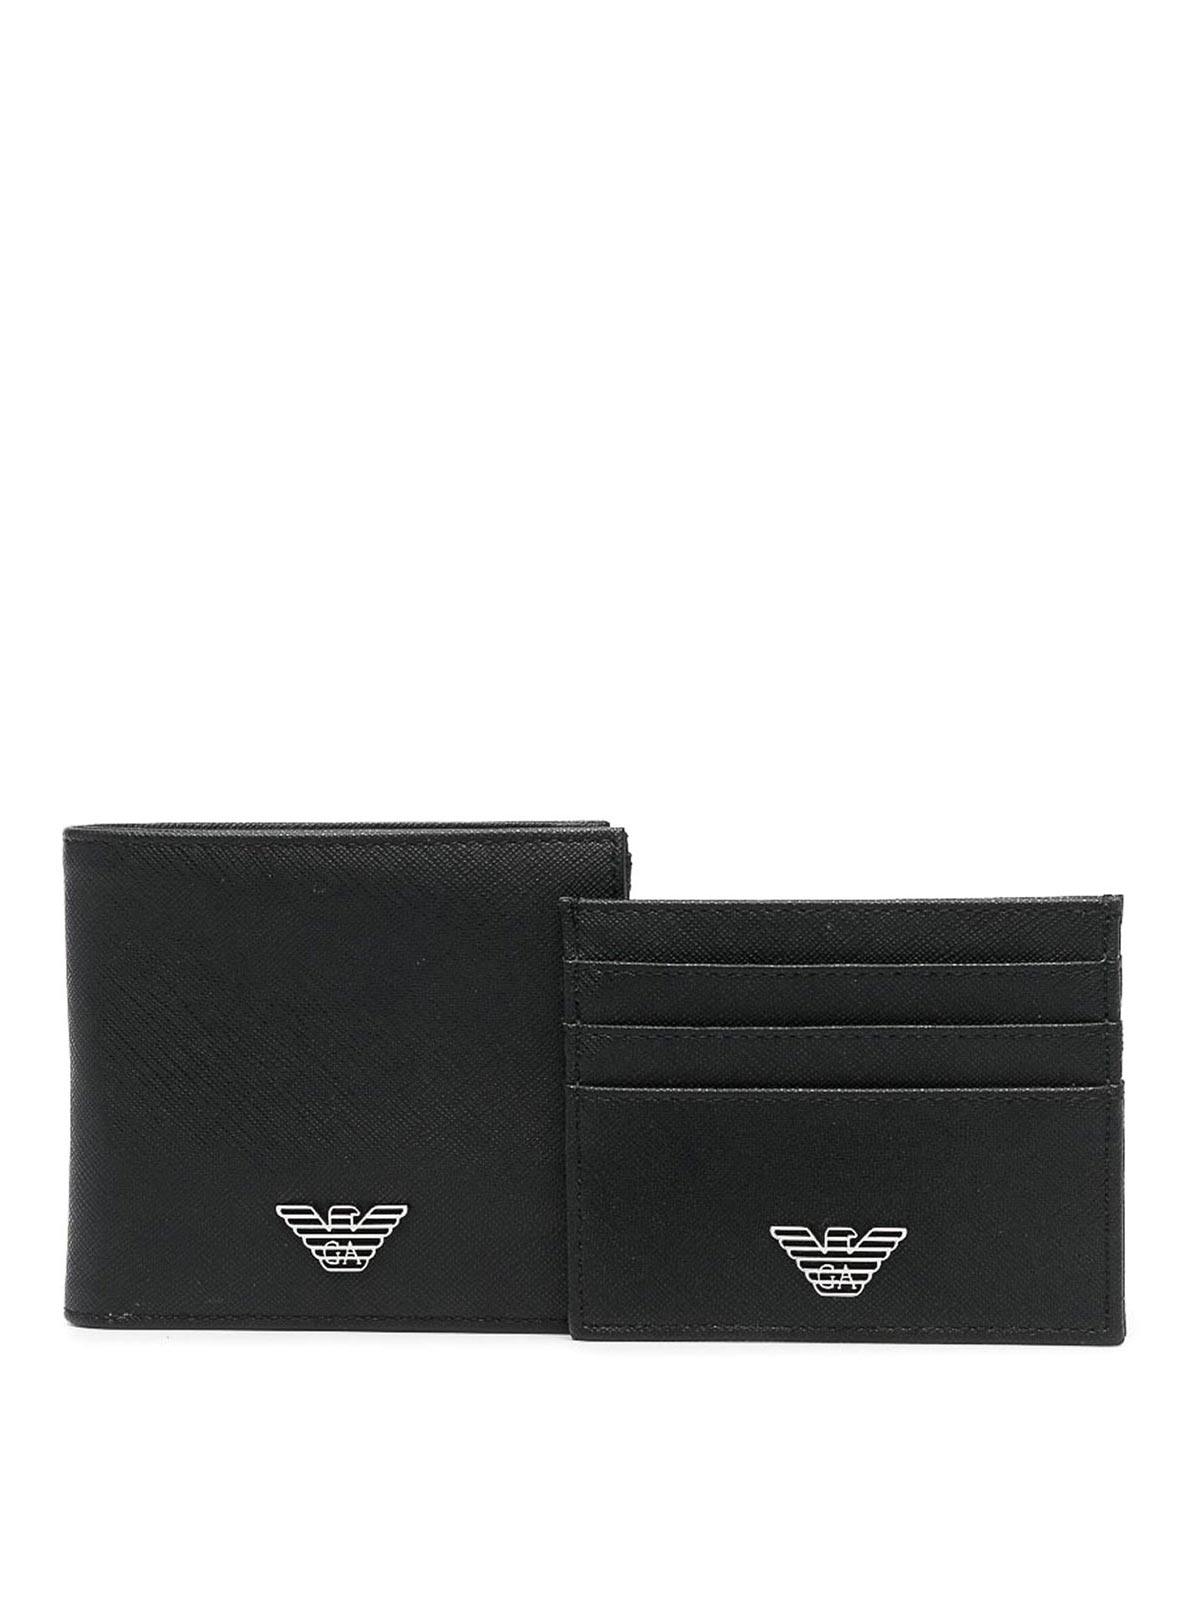 Shop Ea7 Wallet And Credit Card Case Gift Box In Black